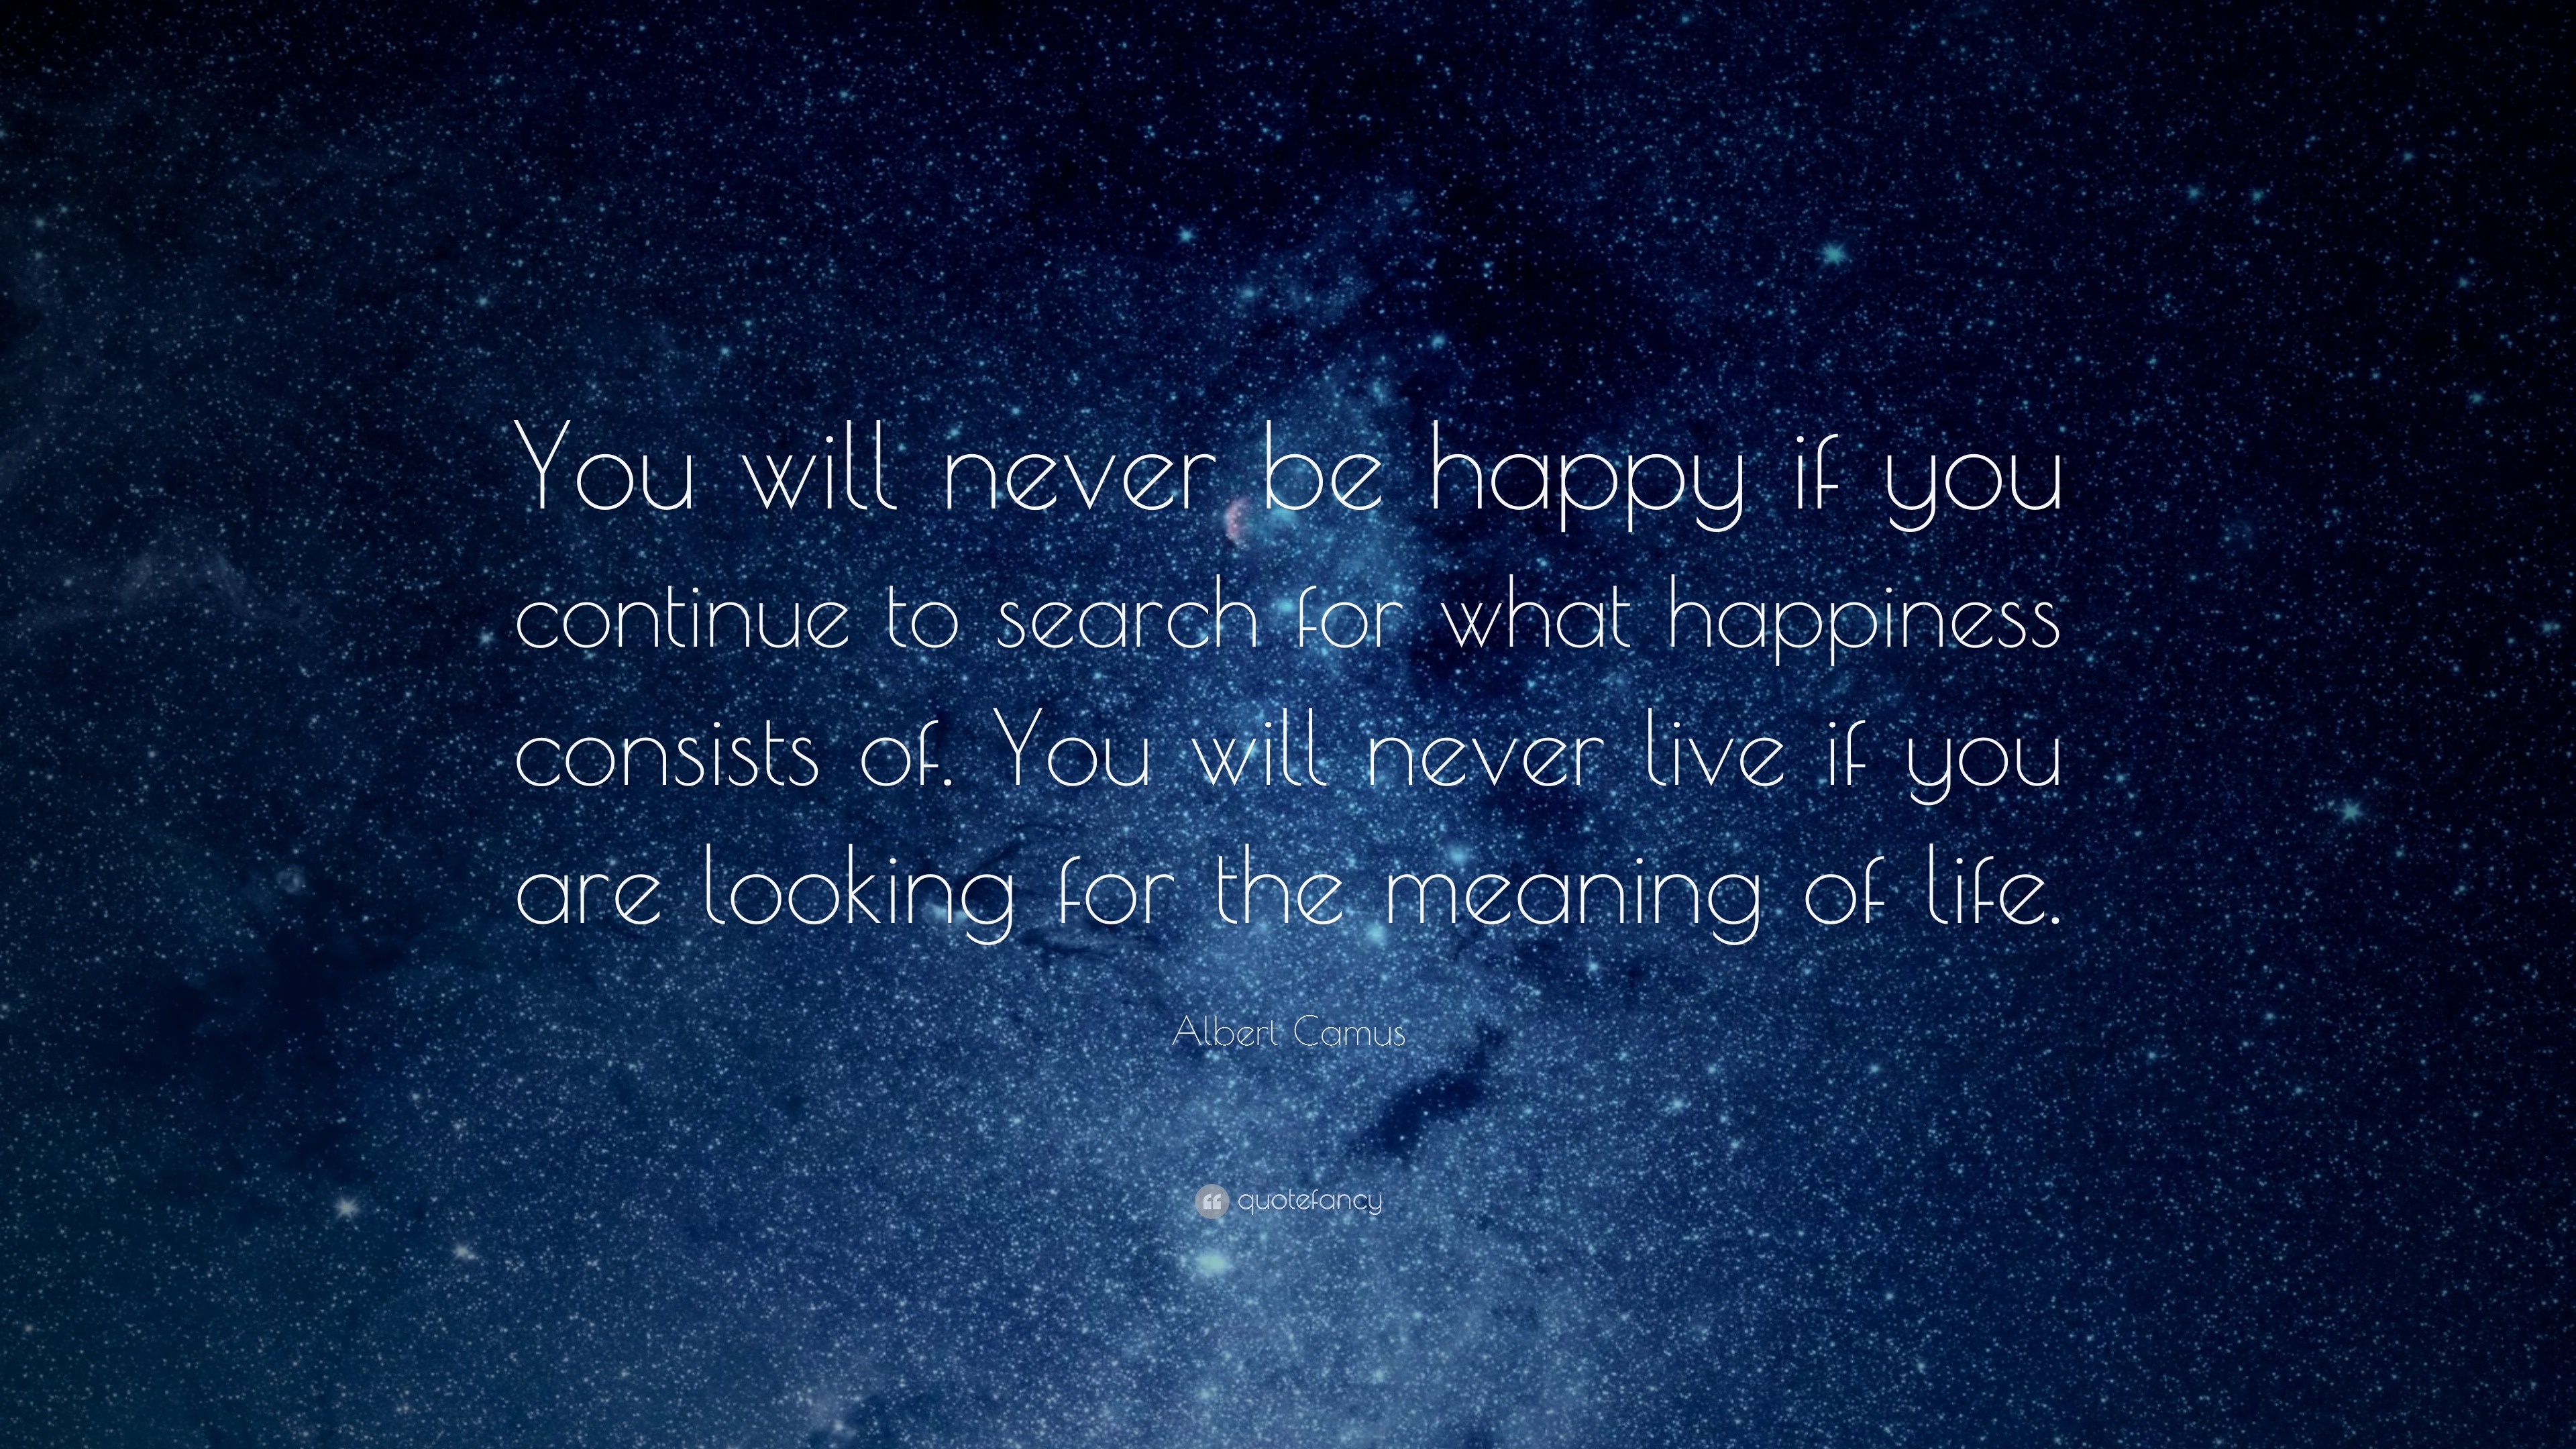 Happiness Quotes “You will never be happy if you continue to search for what